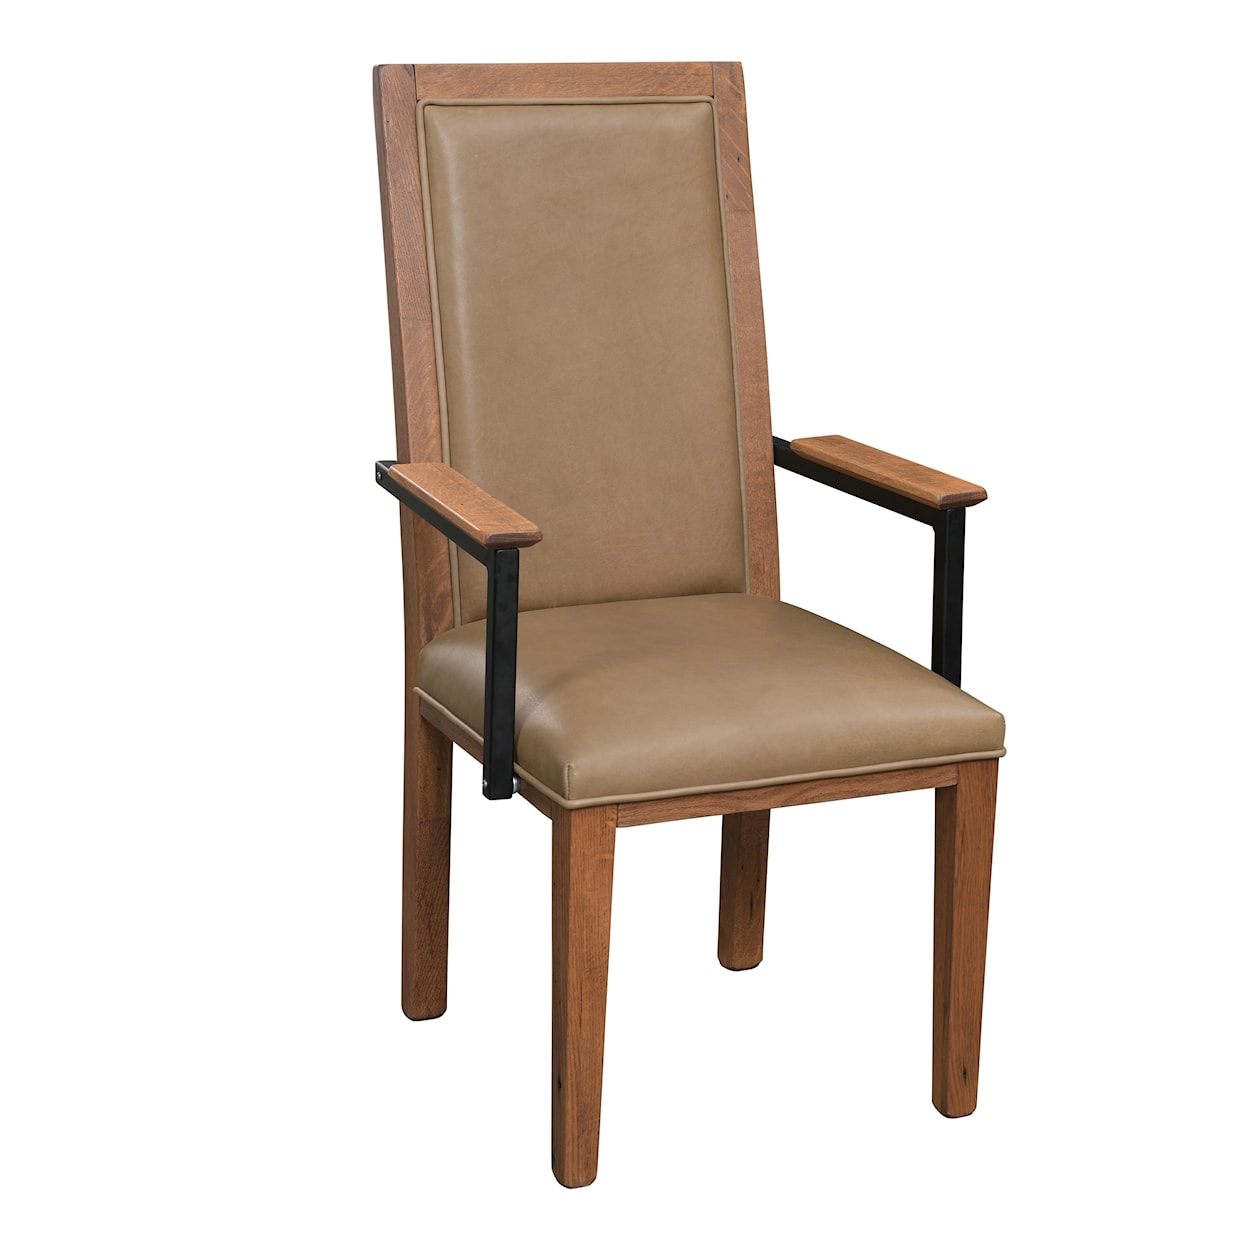 Urban Barnwood Furniture 1869 Dining Upholstered Arm Chair